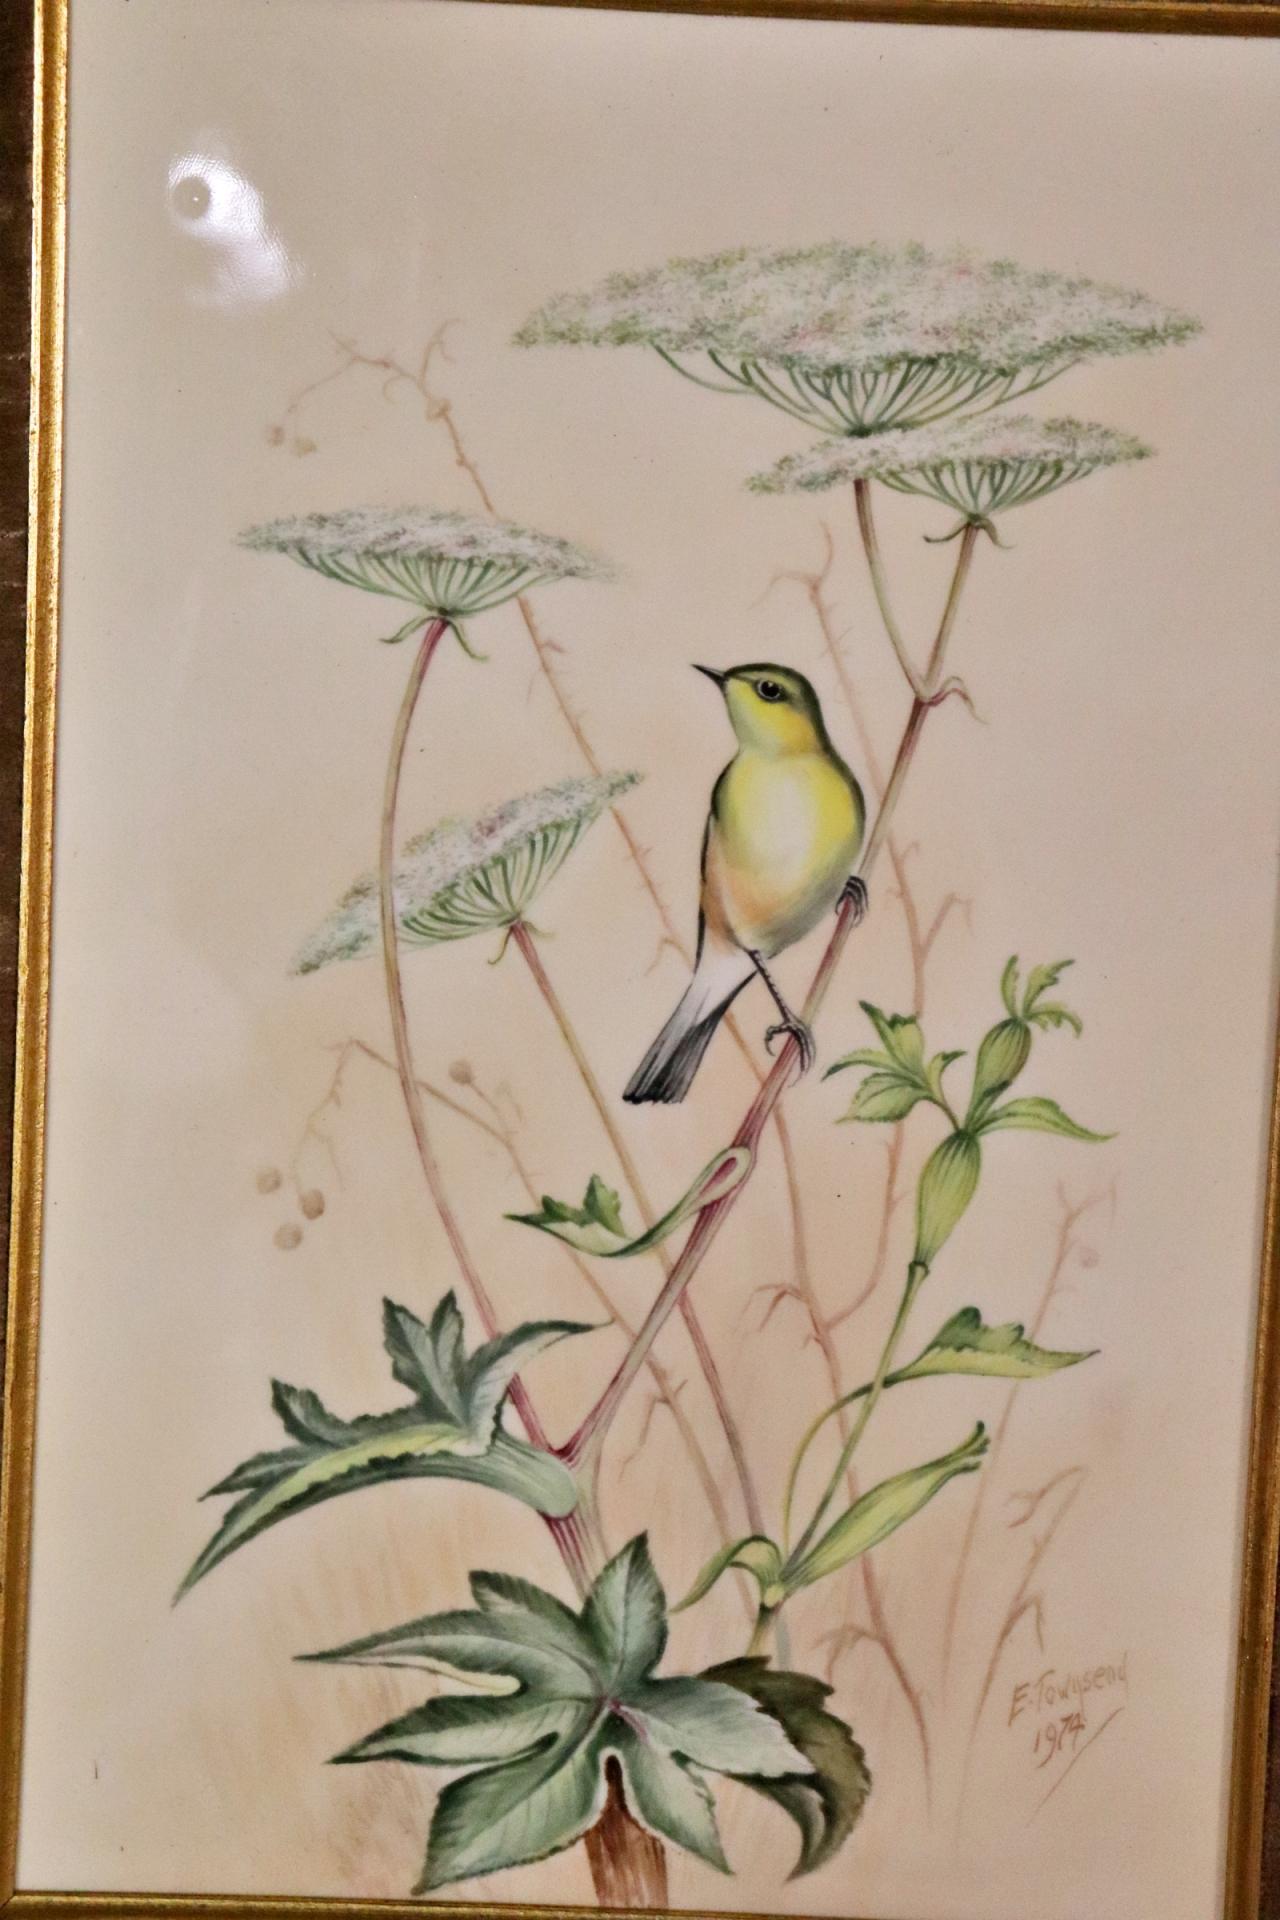 Signed E. Townsend and dated 1974. Number 1 (Chiff Chaff), 2 (Robin), 3 (Chaffinches) and 4 (Wrens) of 15. From a limited edition of 25 sets. British bird subjects by the Worcester Royal Porcelain Co. LTD. Hand carved frame commissioned by Royal